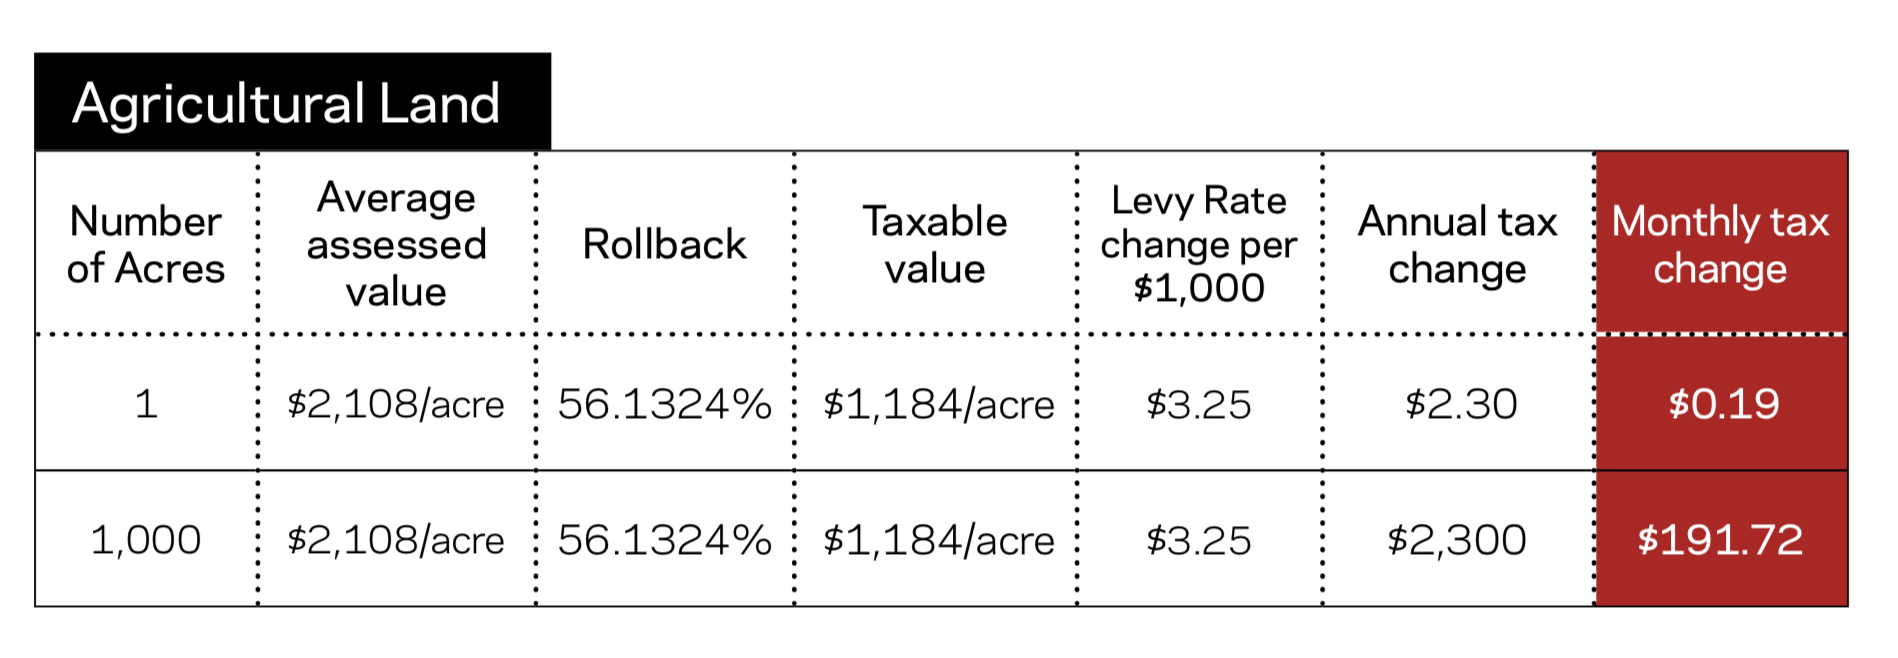 Agricultural Land Monthly Tax Chart